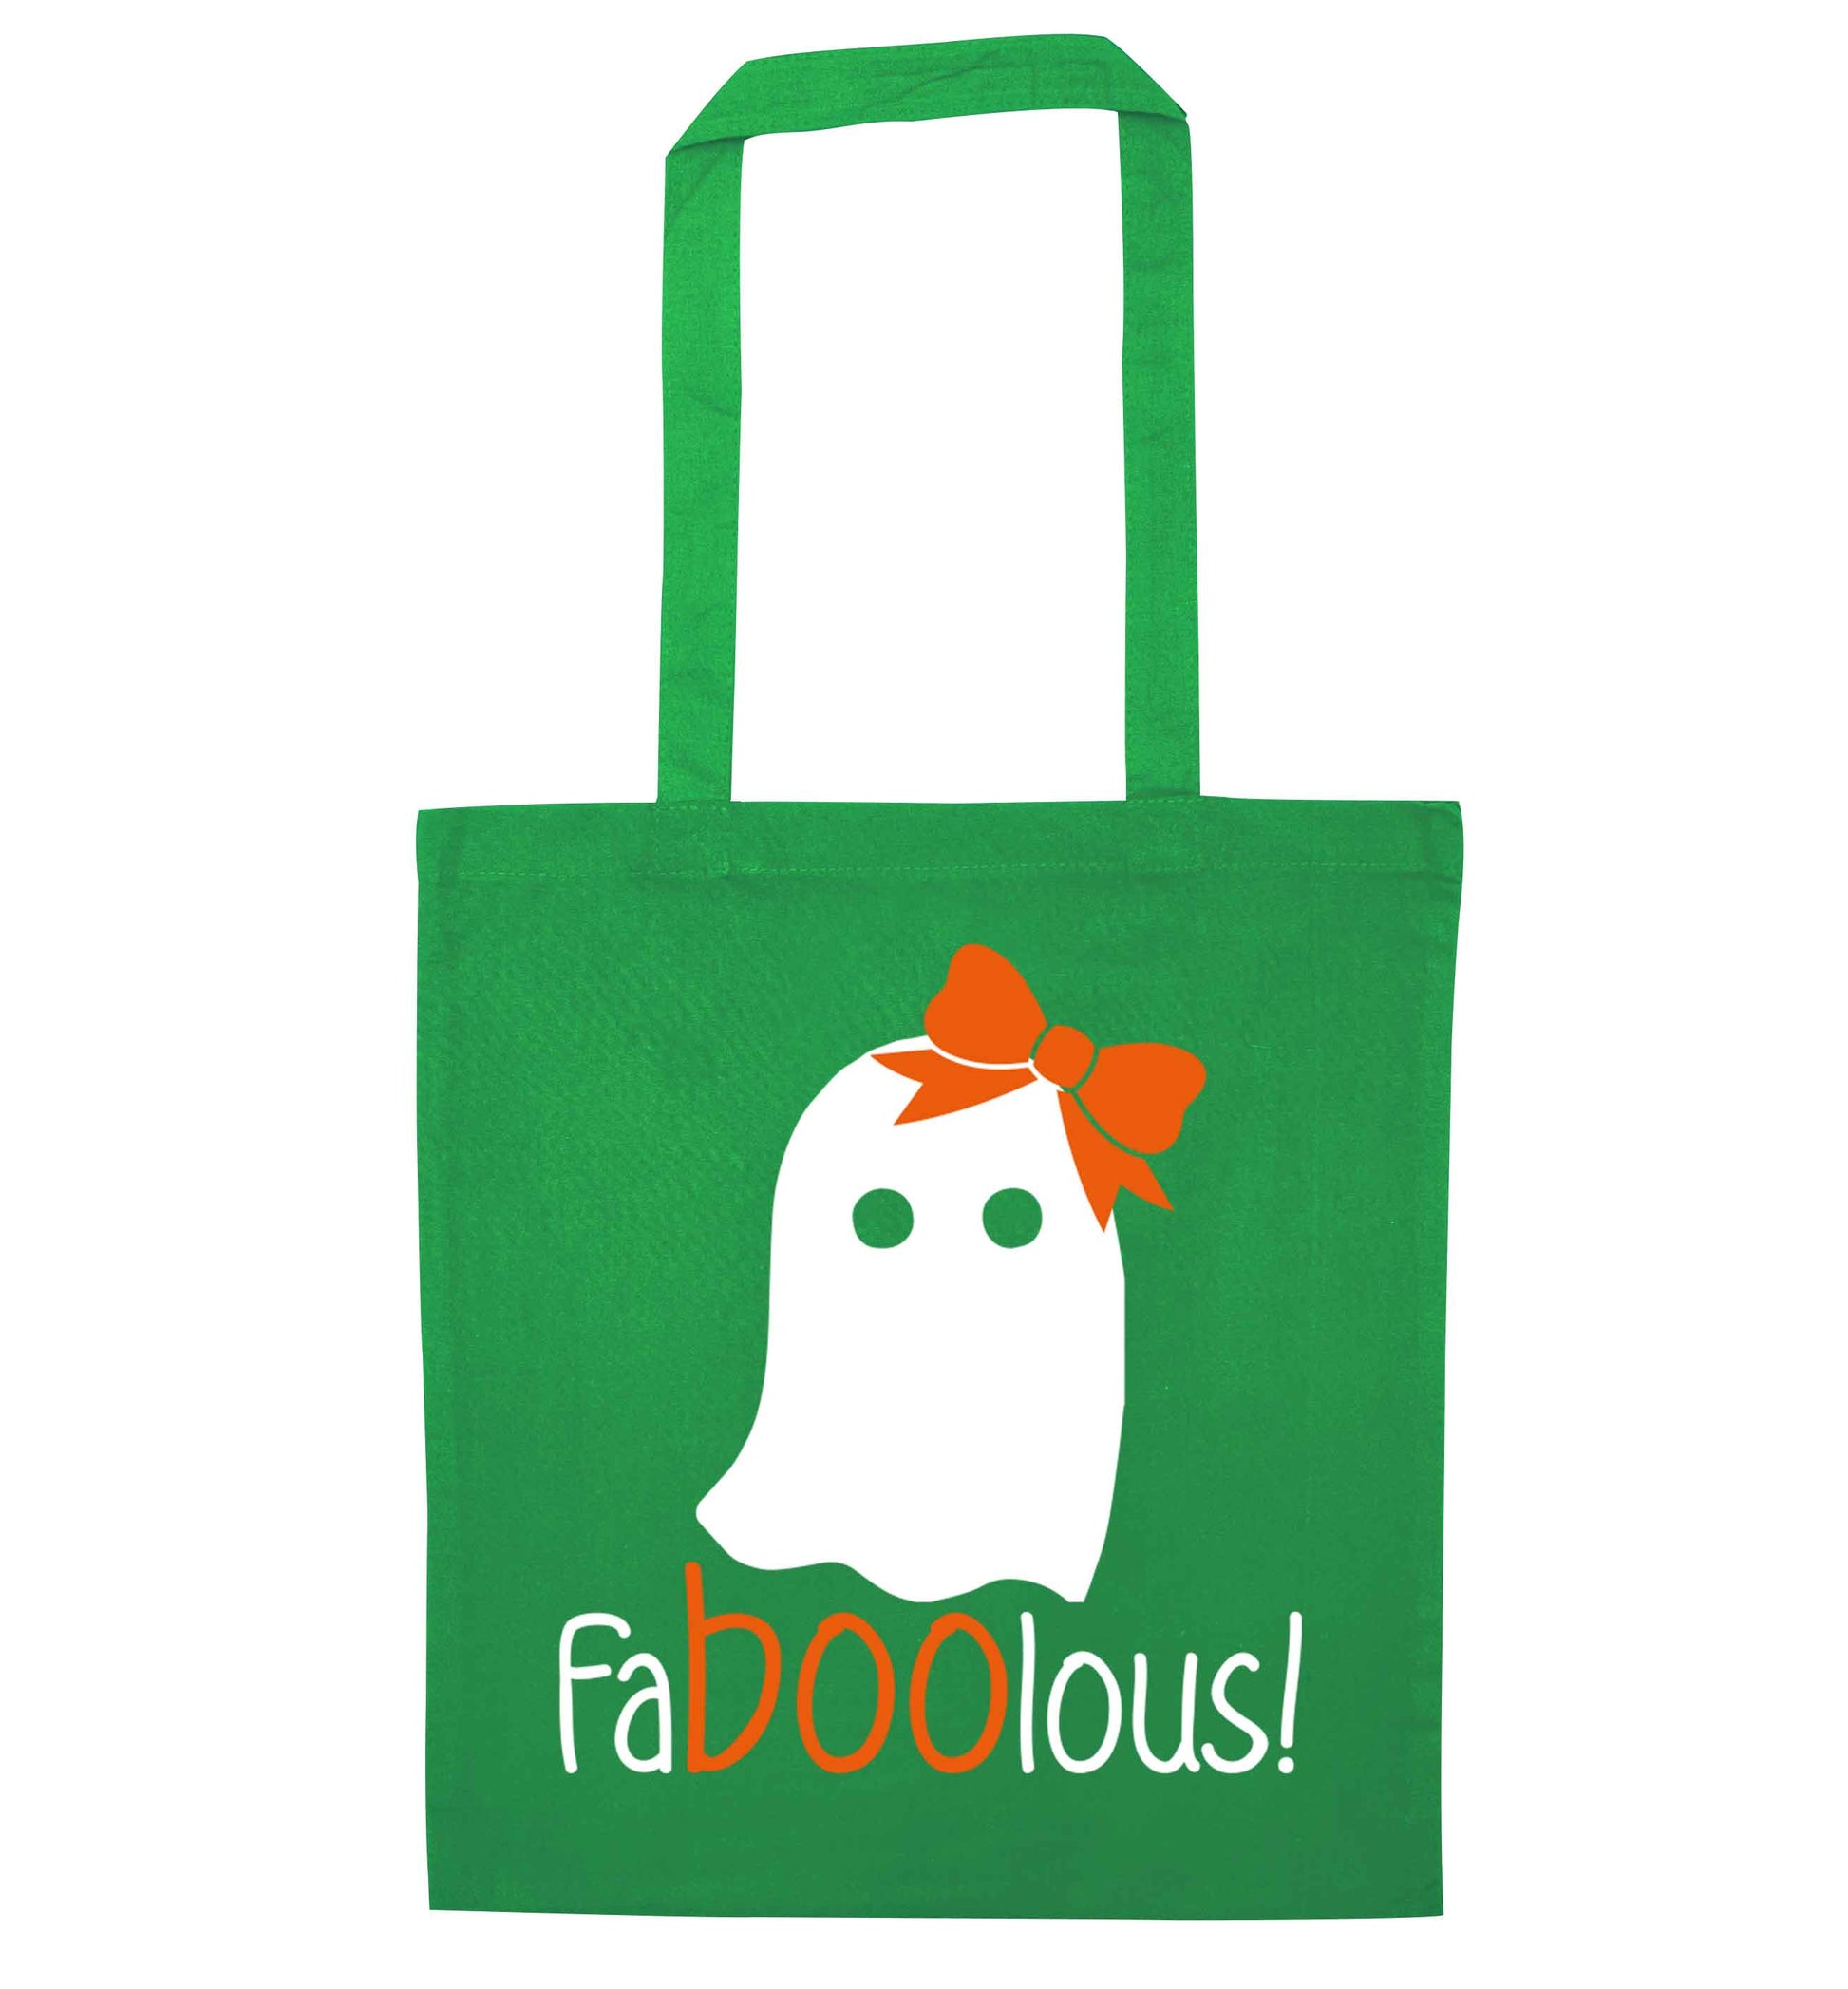 Faboolous ghost green tote bag